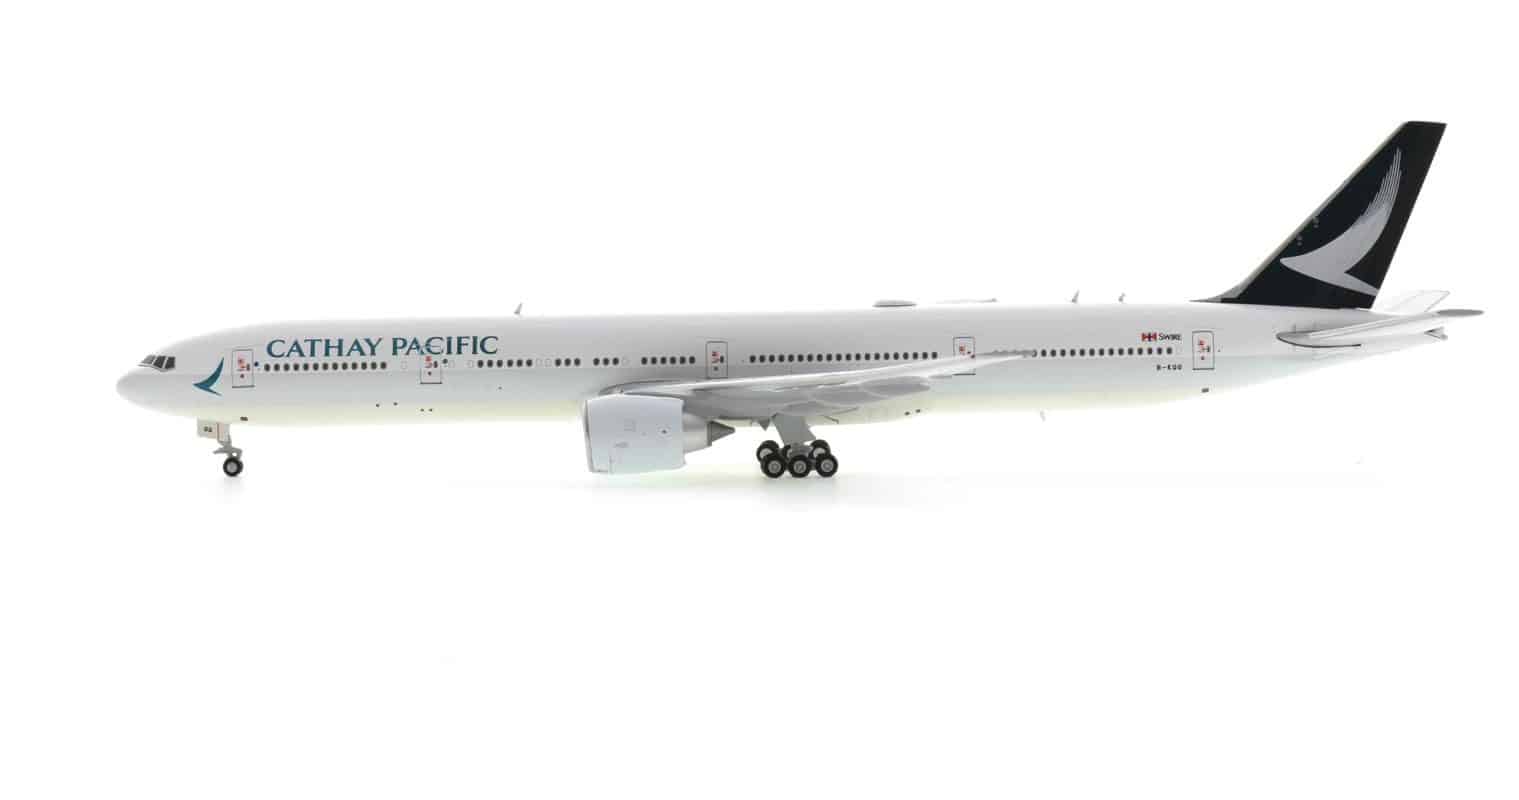 Port side view of BT400-777-3-002 - 1/200 scale diecast model B777-300ER of registration B-KQQ in Cathay Pacific's livery.